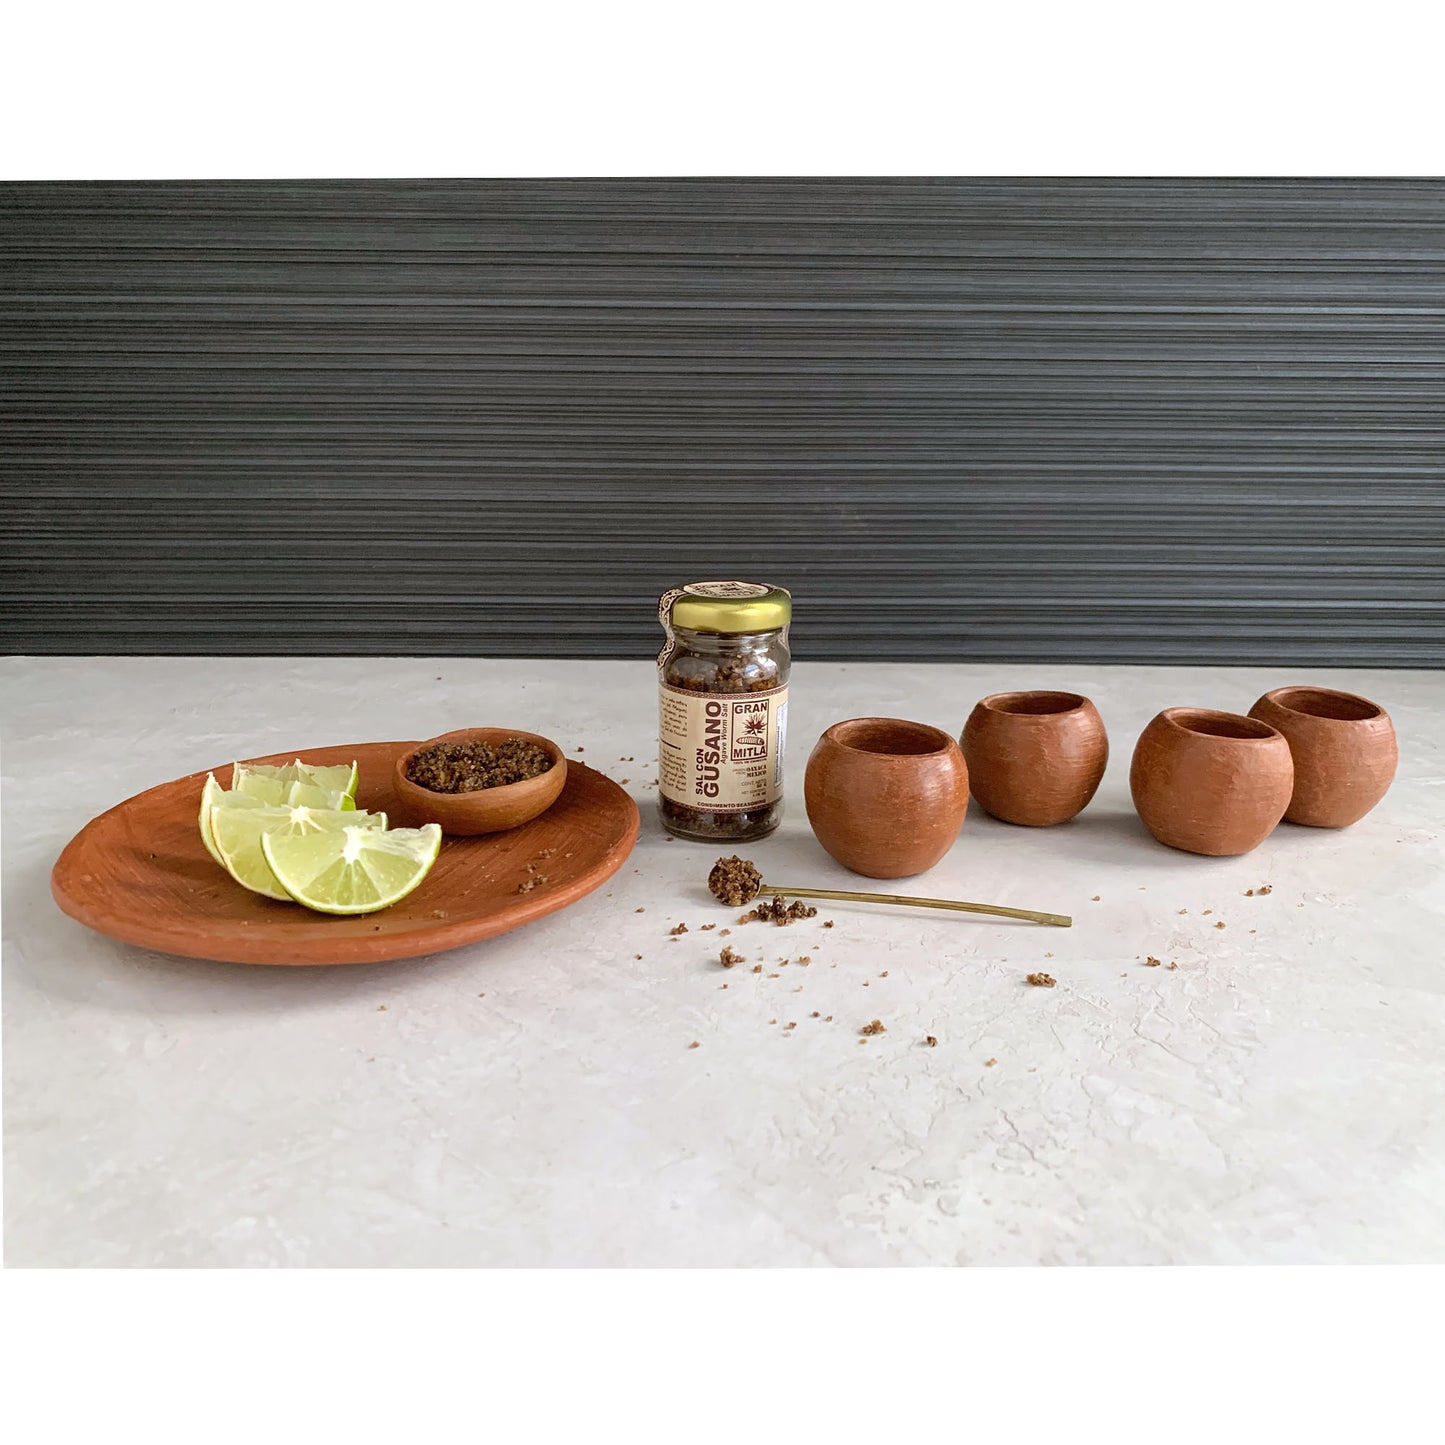 Oaxacan Red Clay Mezcal Copitas Tasting Set with or without Sal de Gusano (Agave Worm Salt)